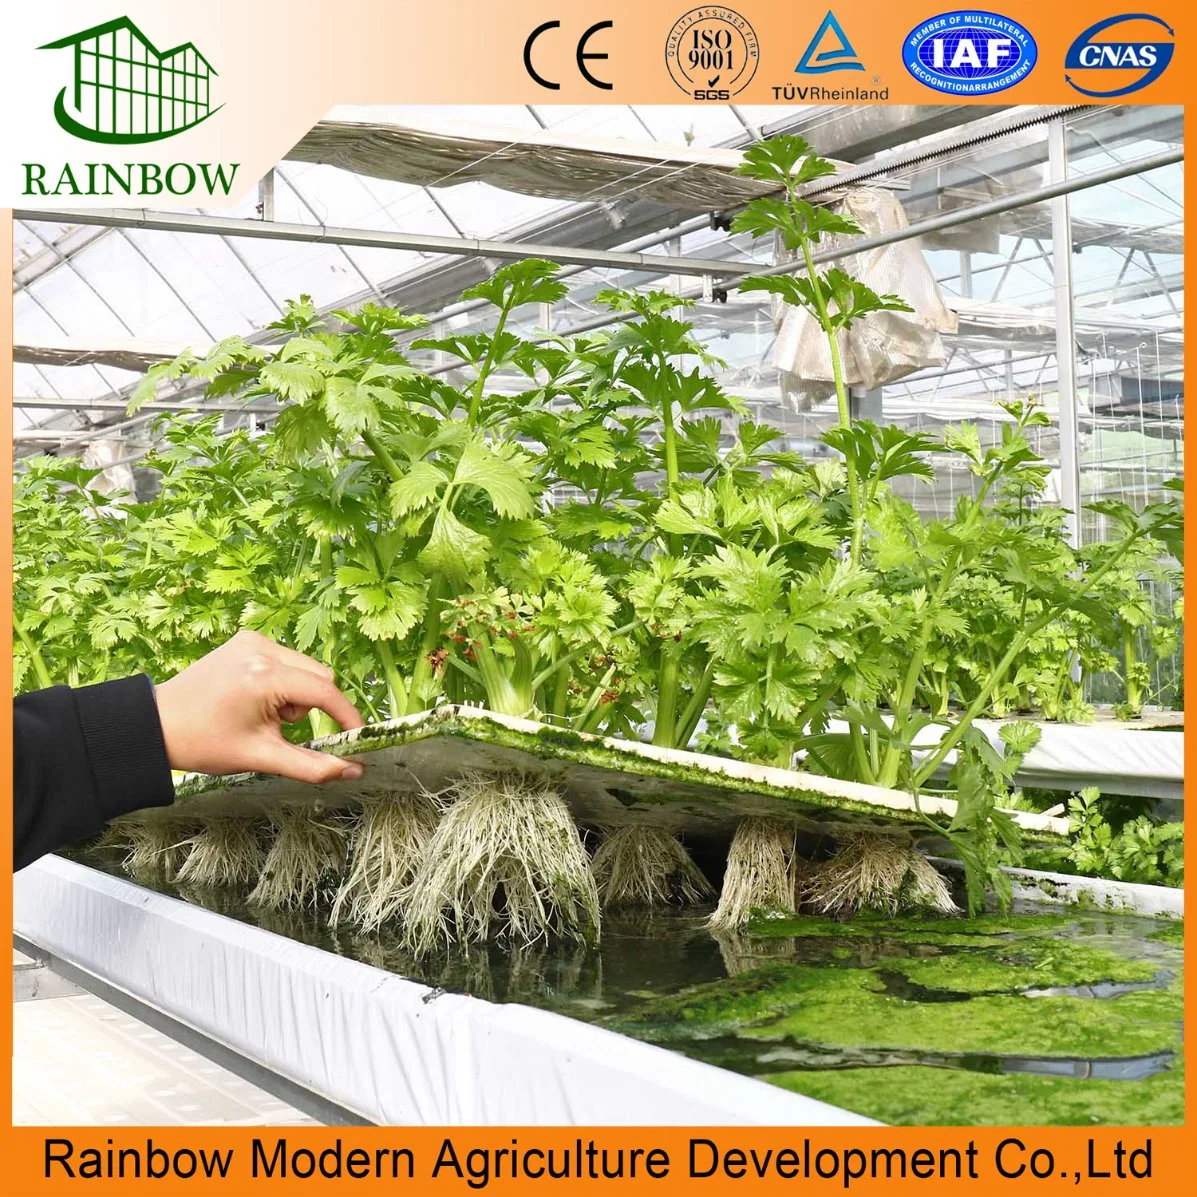 Smart Multi-Span Tunnel / Arch Type PE / Po Film Plastic Agriculture / Commercial Eco Greenhouse for Tomato/ Cucumber Strawberry with Hydroponics Growing System